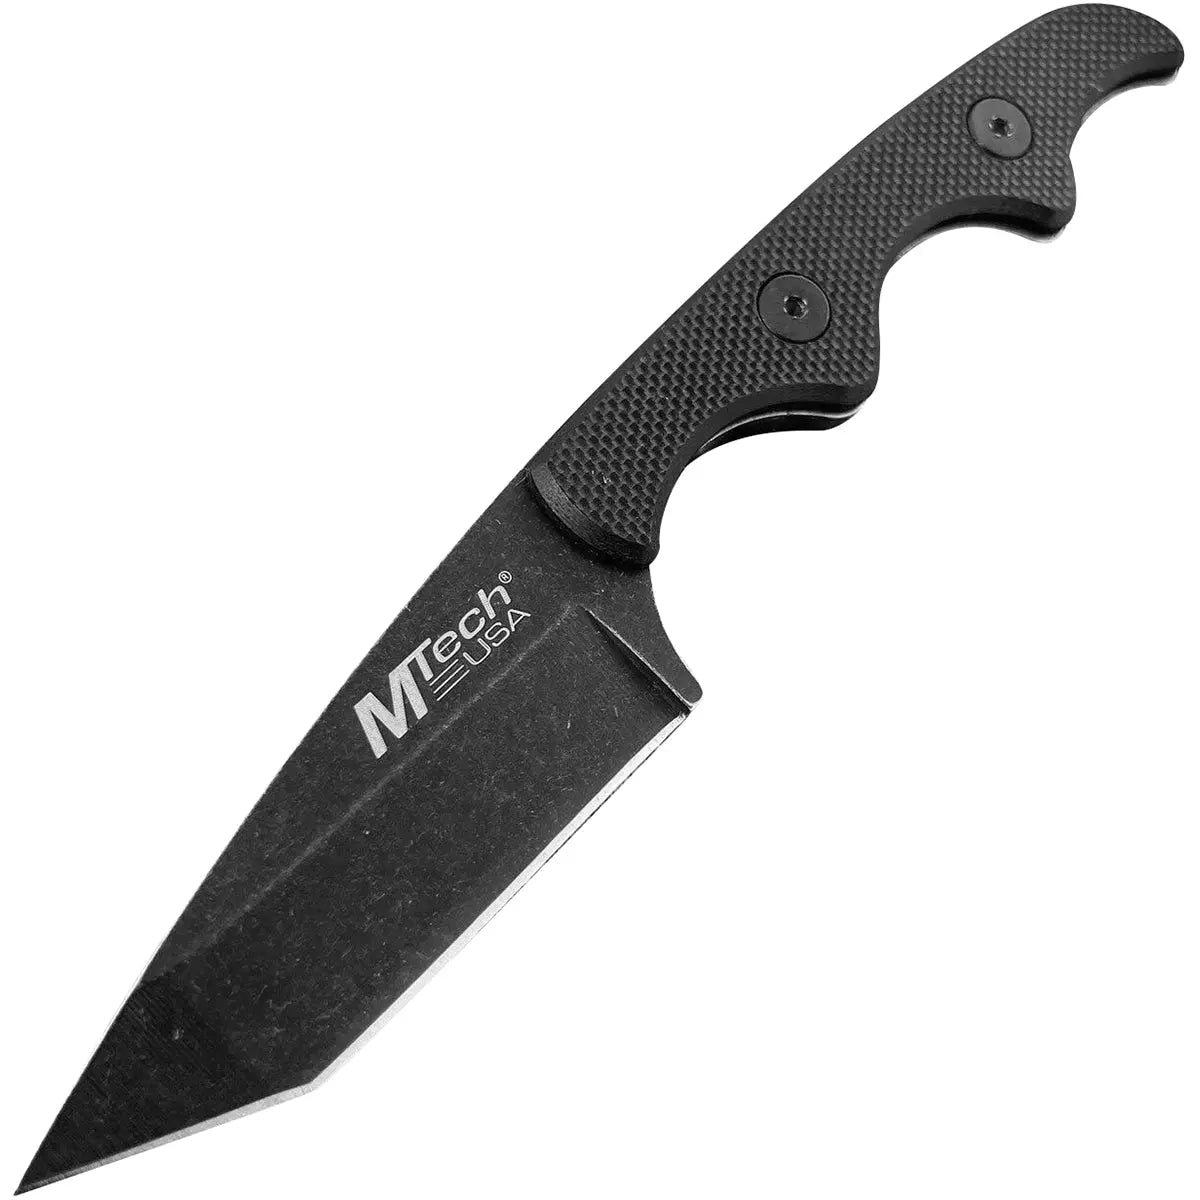 MTech USA Tactical Tanto Fixed Blade Combat Neck Knife, Stonewashed, MT-673 M-Tech